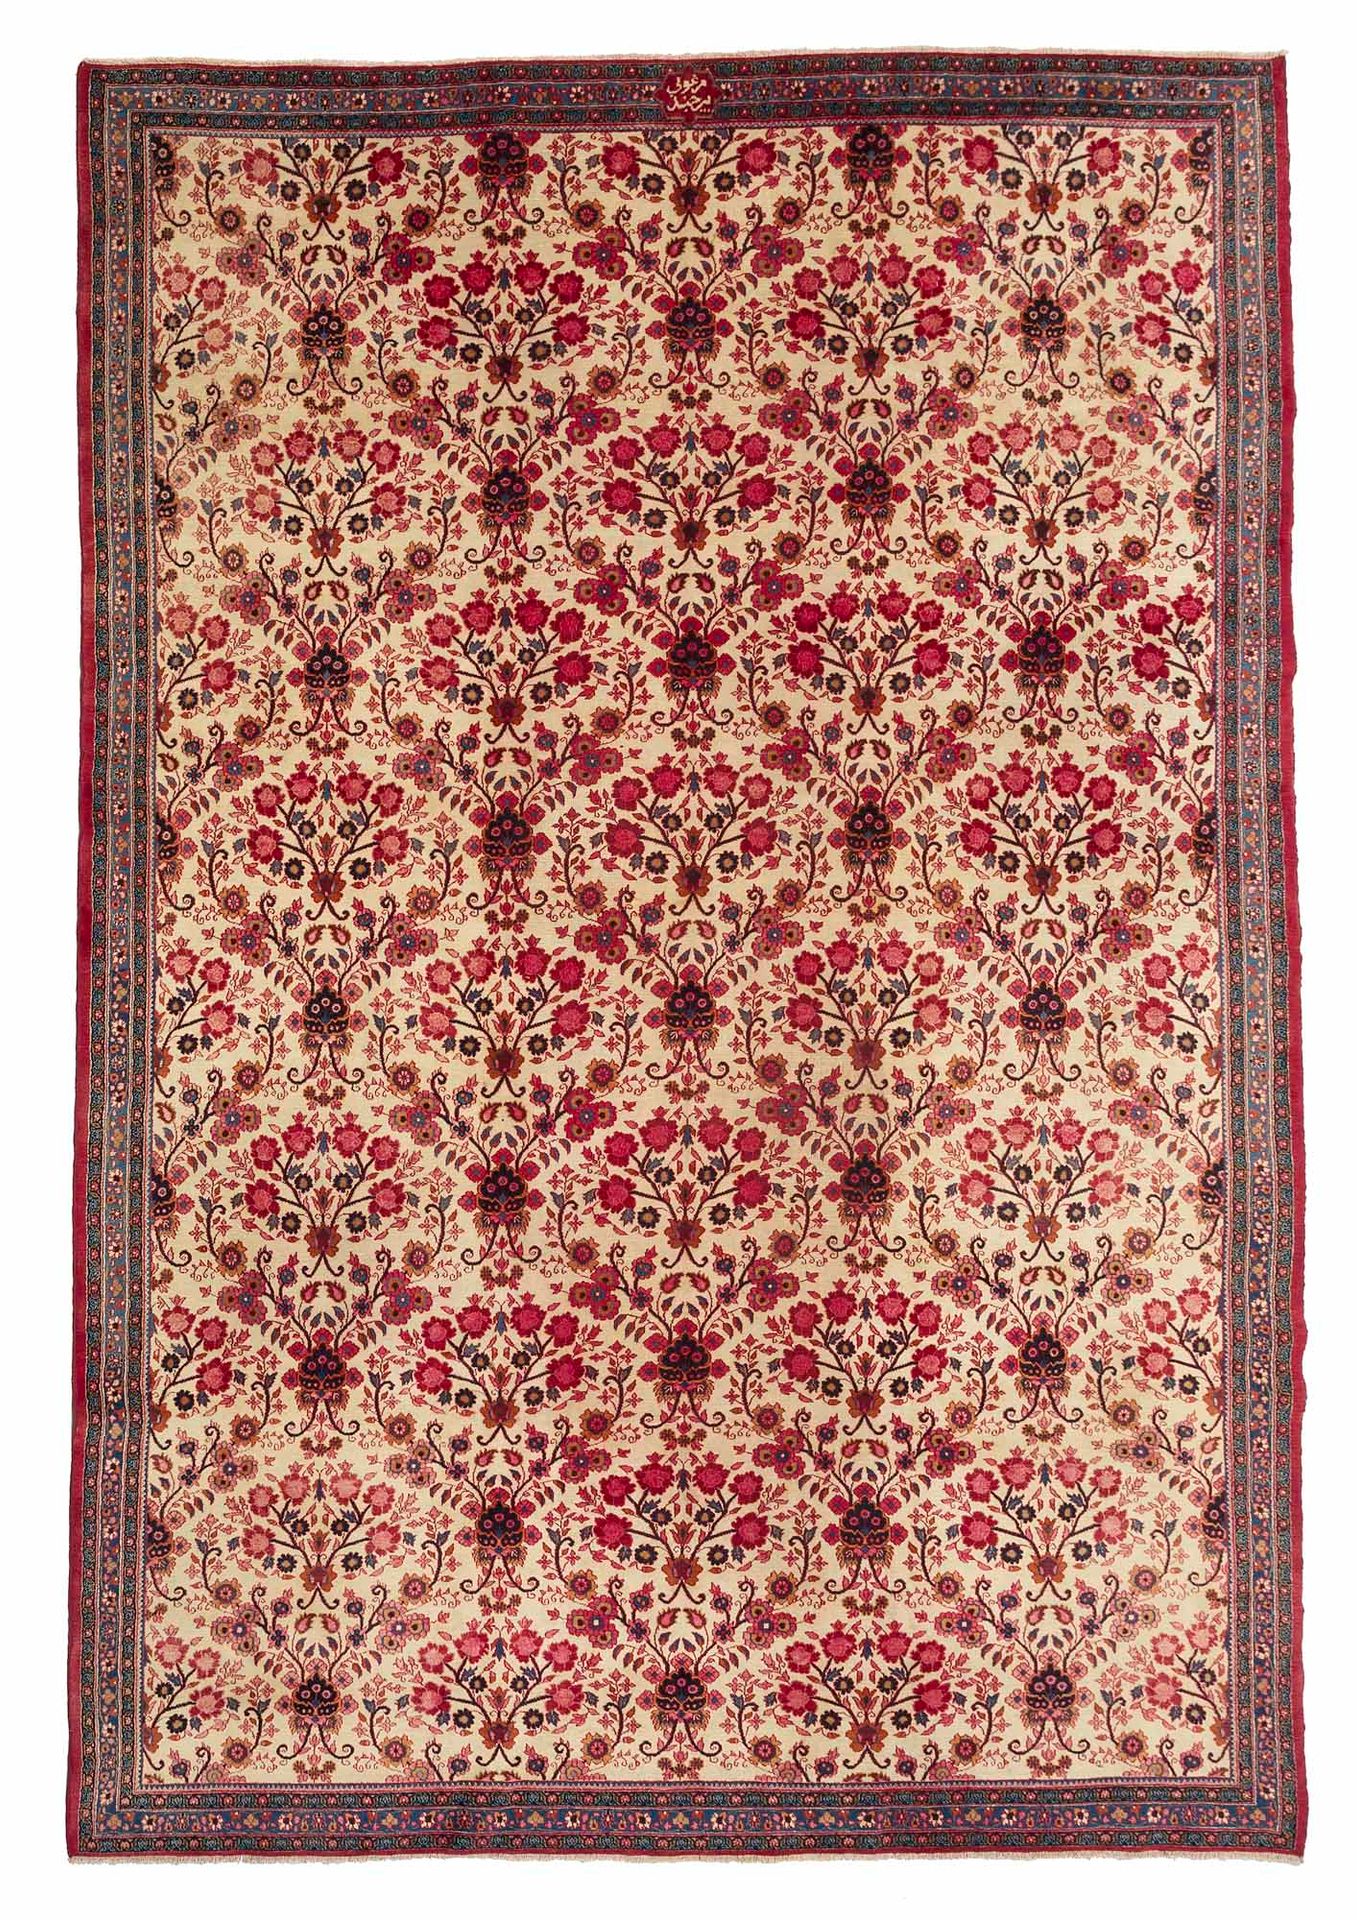 Null MÉCHED KHORASSAN carpet, (Persia), 1st third of the 20th century

Dimension&hellip;